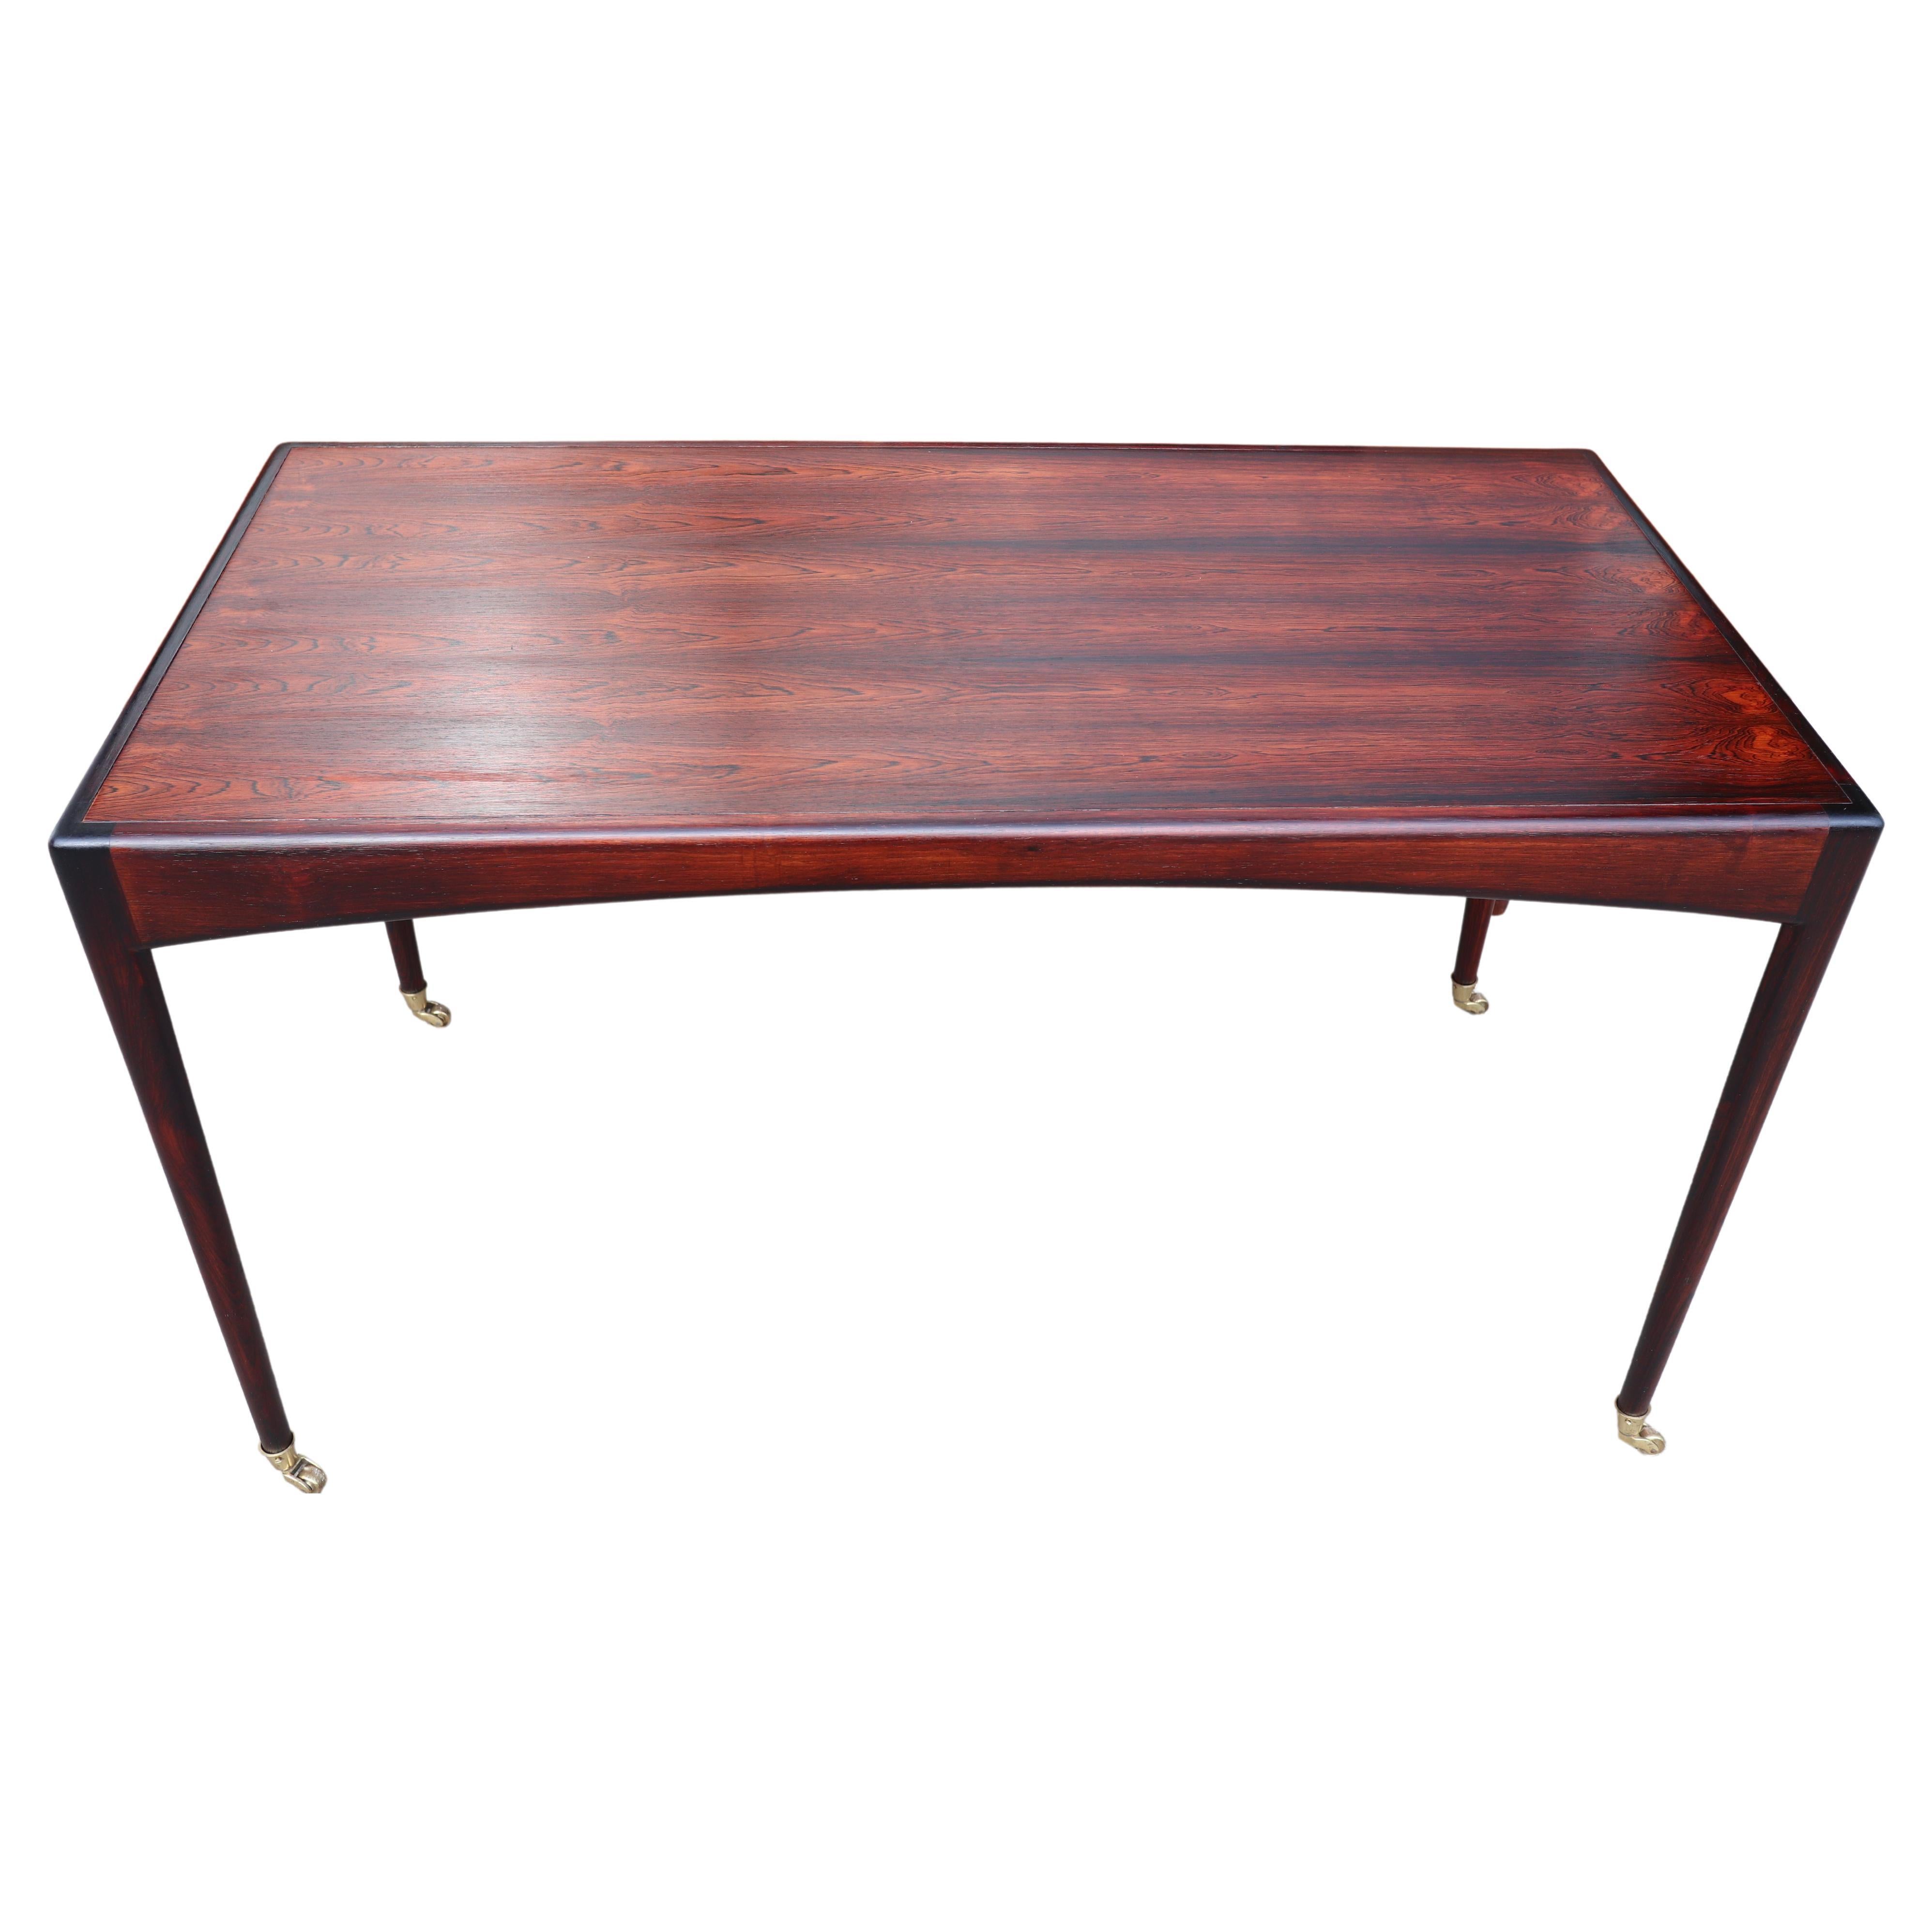 Vintage 1960s Desk/Console Table "Modus" in Rio Rosewood, Kristian Vedel